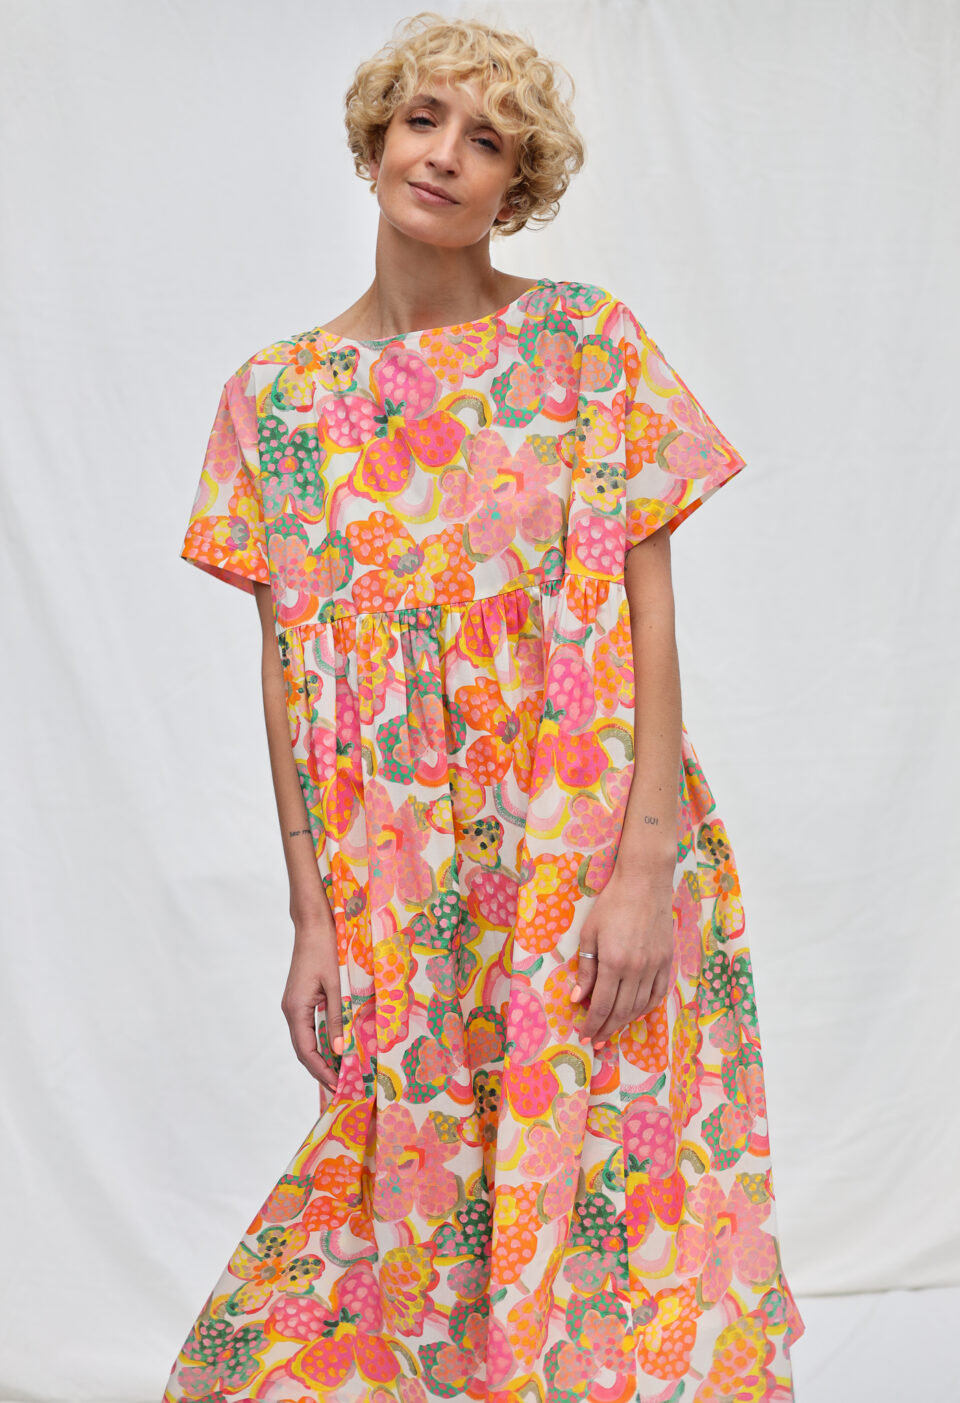 Oversize floral print dress SILVINA | Dress | Sustainable clothing | OffOn clothing